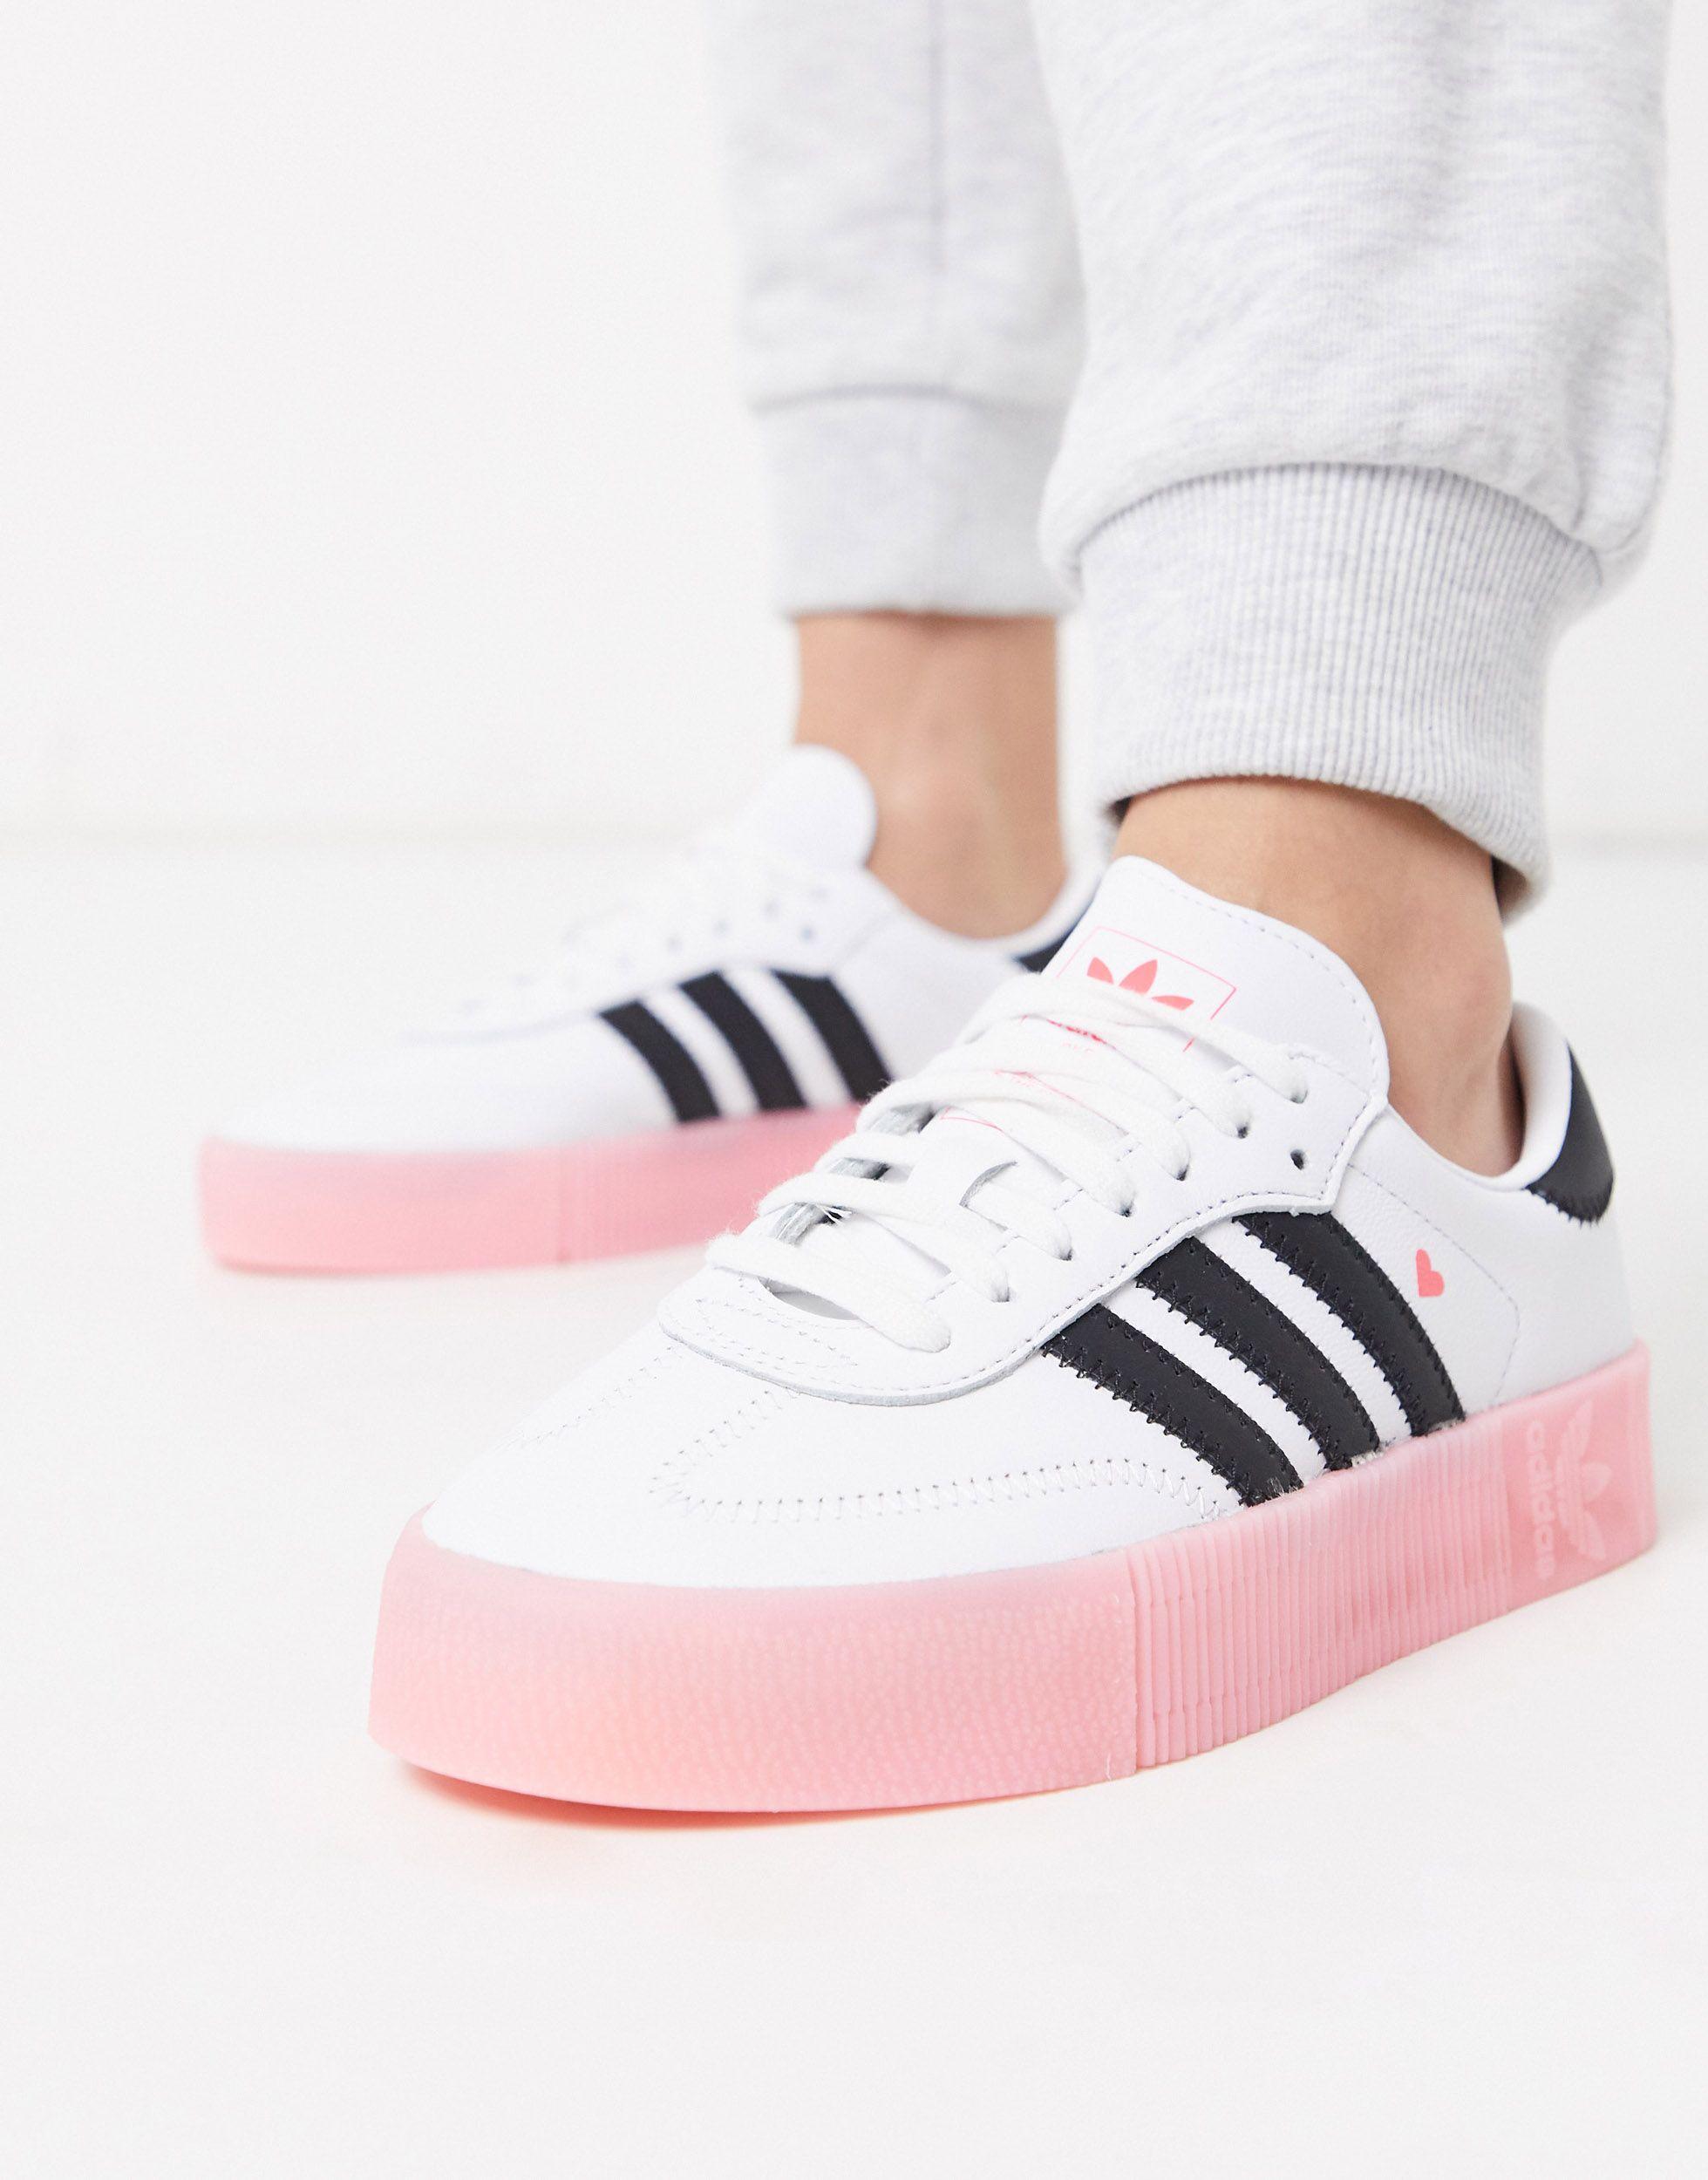 Literacy Penetration straight ahead adidas Originals Leather Samba Rose Sneakers With Heart Detail in Pink |  Lyst